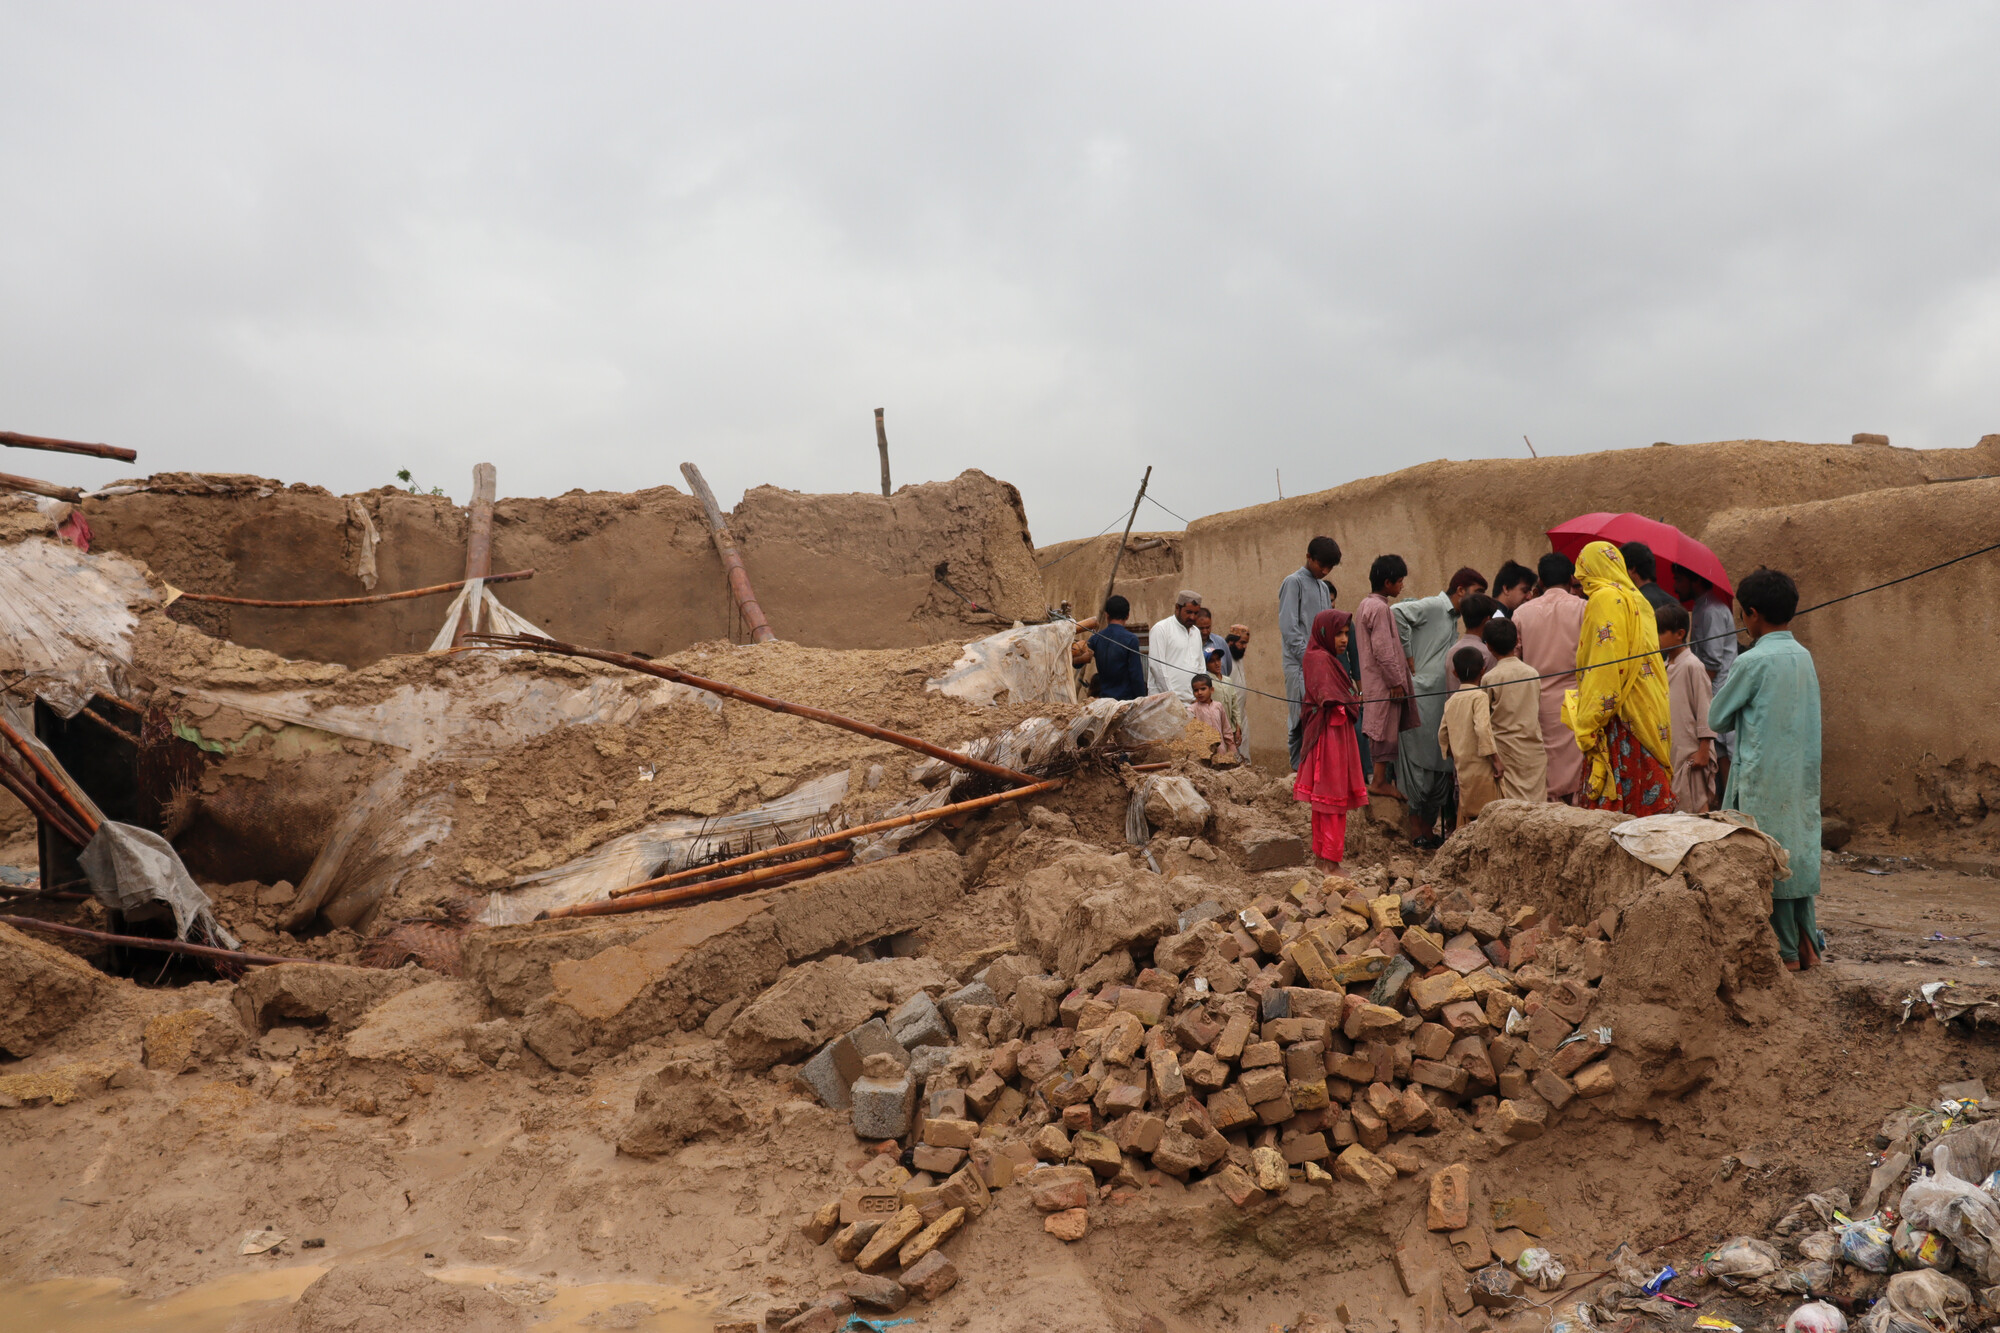 A group of people stand together near a pile of rubble and the remains of a home after floods destroyed it.